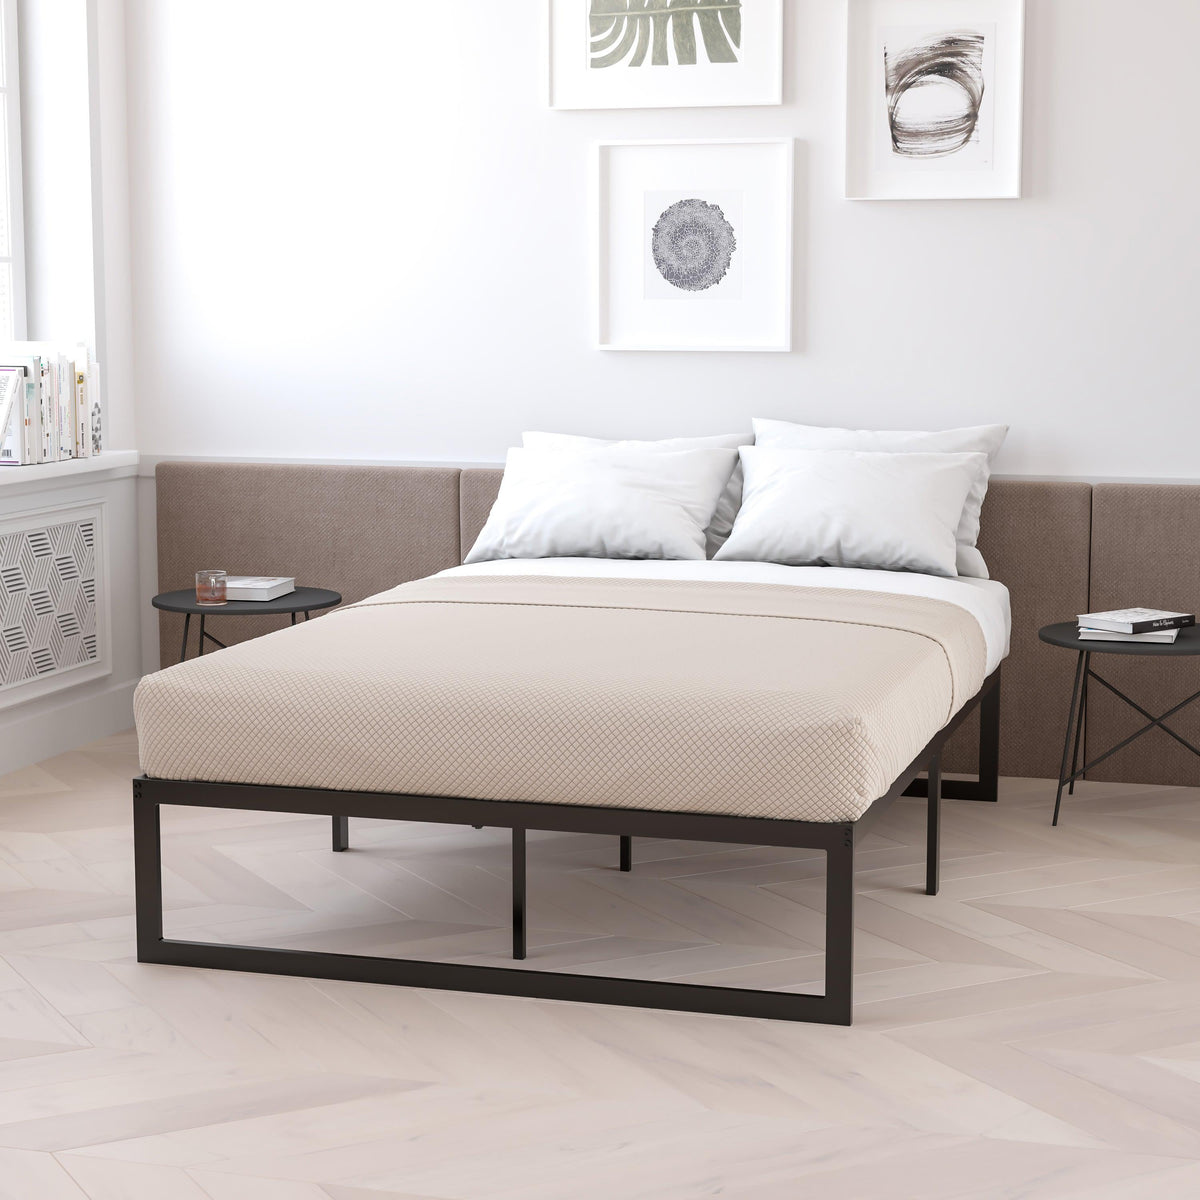 Full |#| 14inch Full Platform Bed Frame & 12inch Mattress in a Box - No Box Spring Required